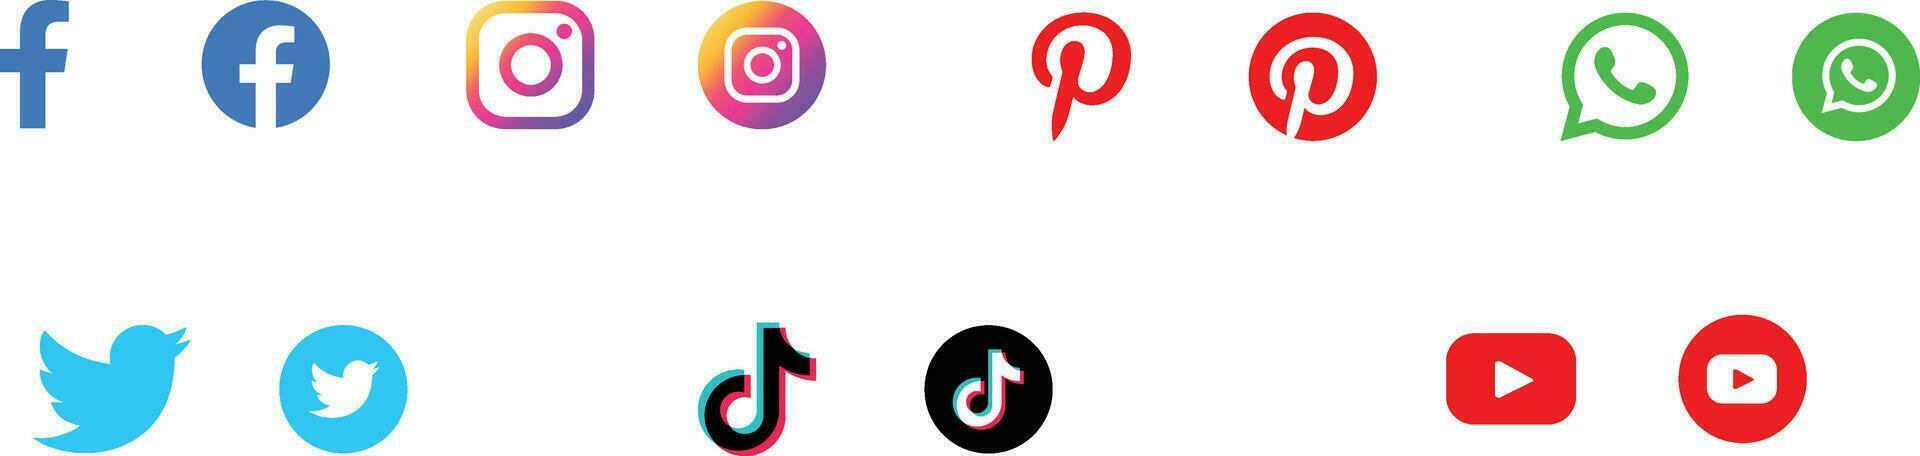 Colourful vector social media icons download